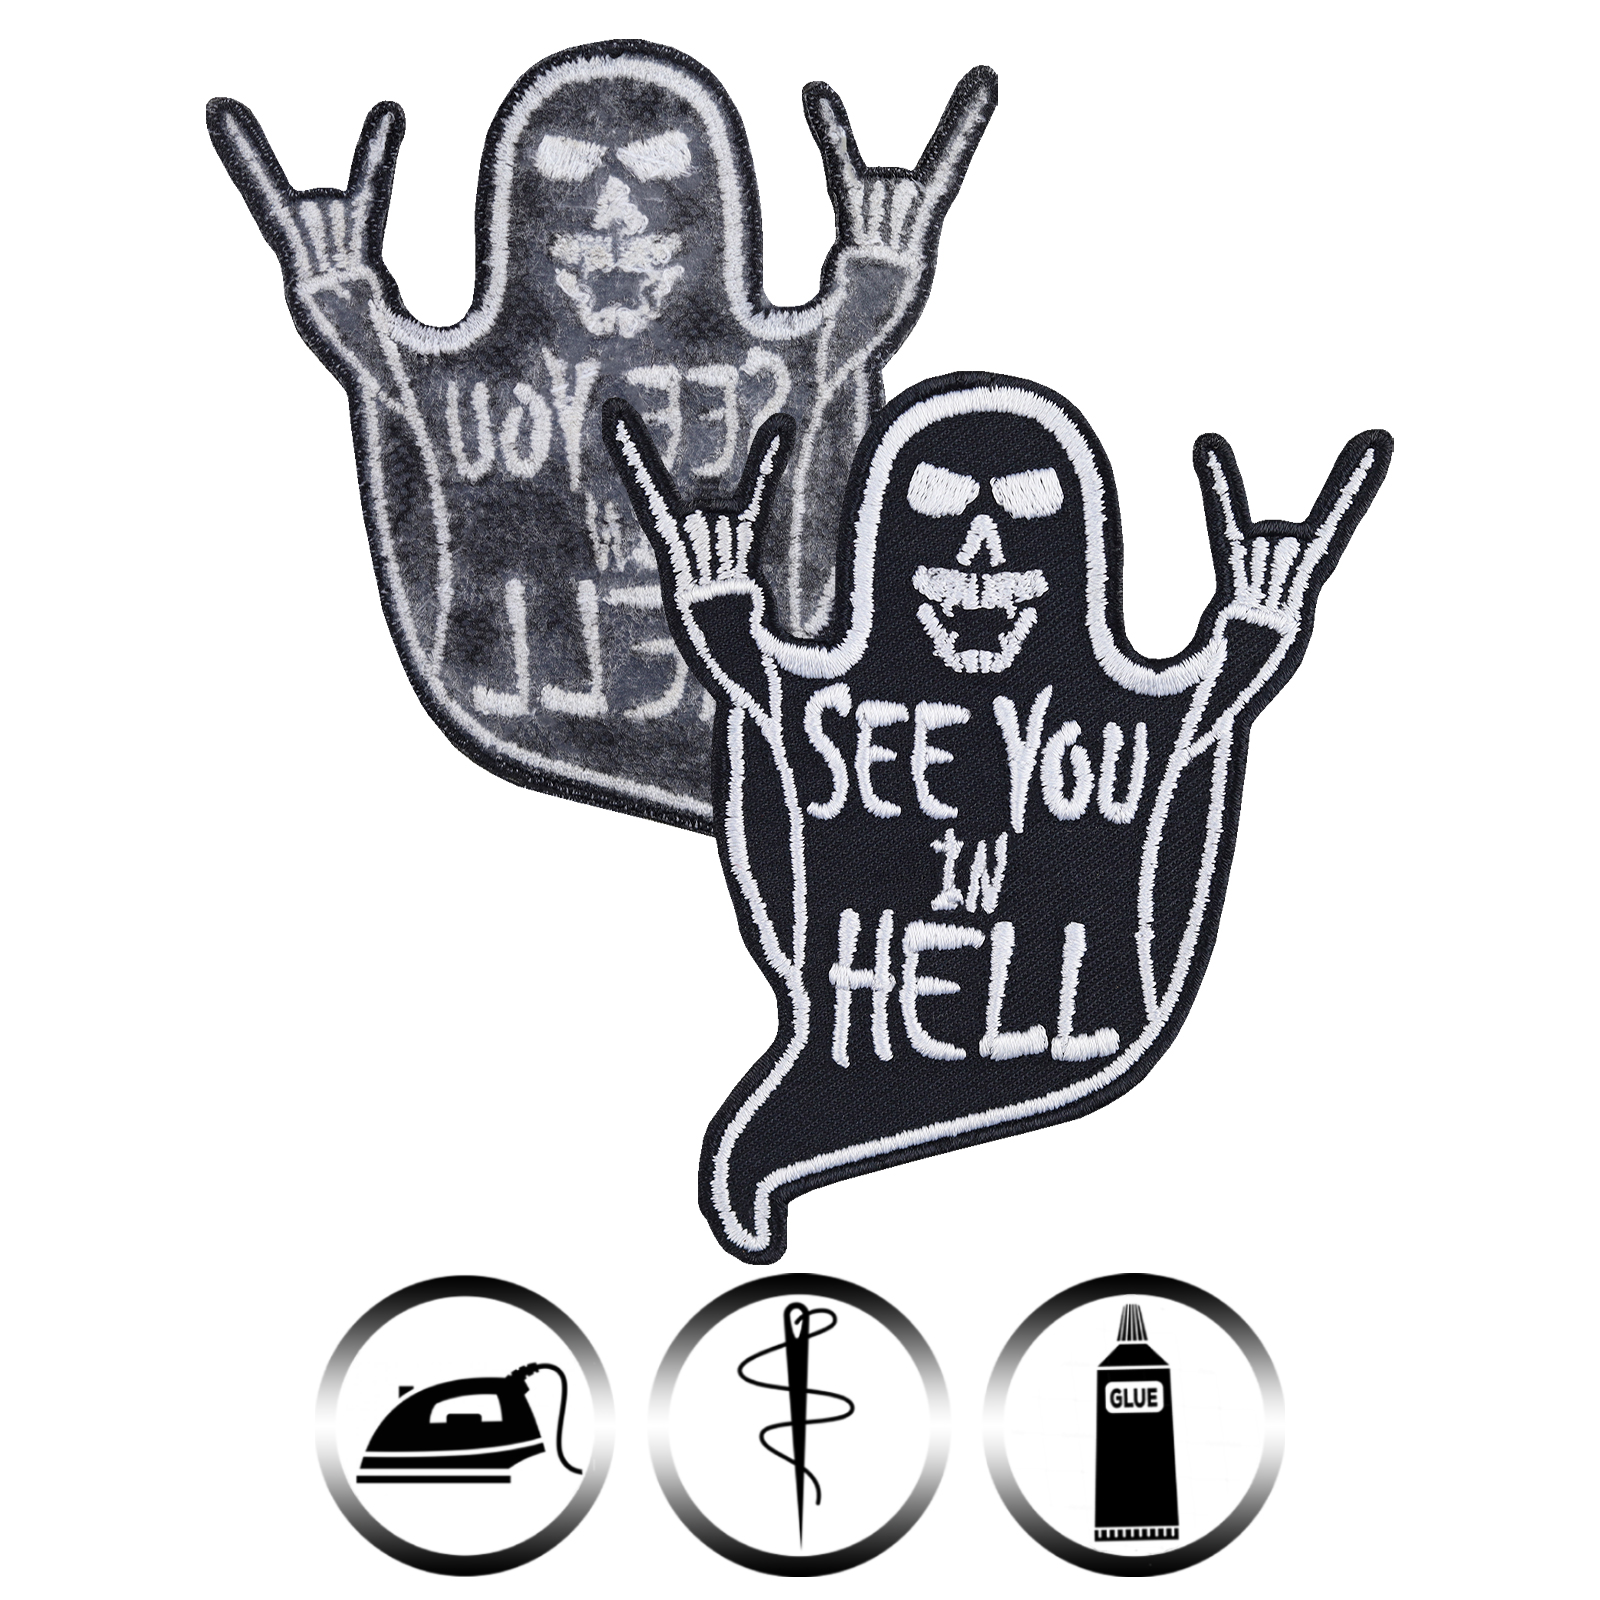 See you in hell - Patch